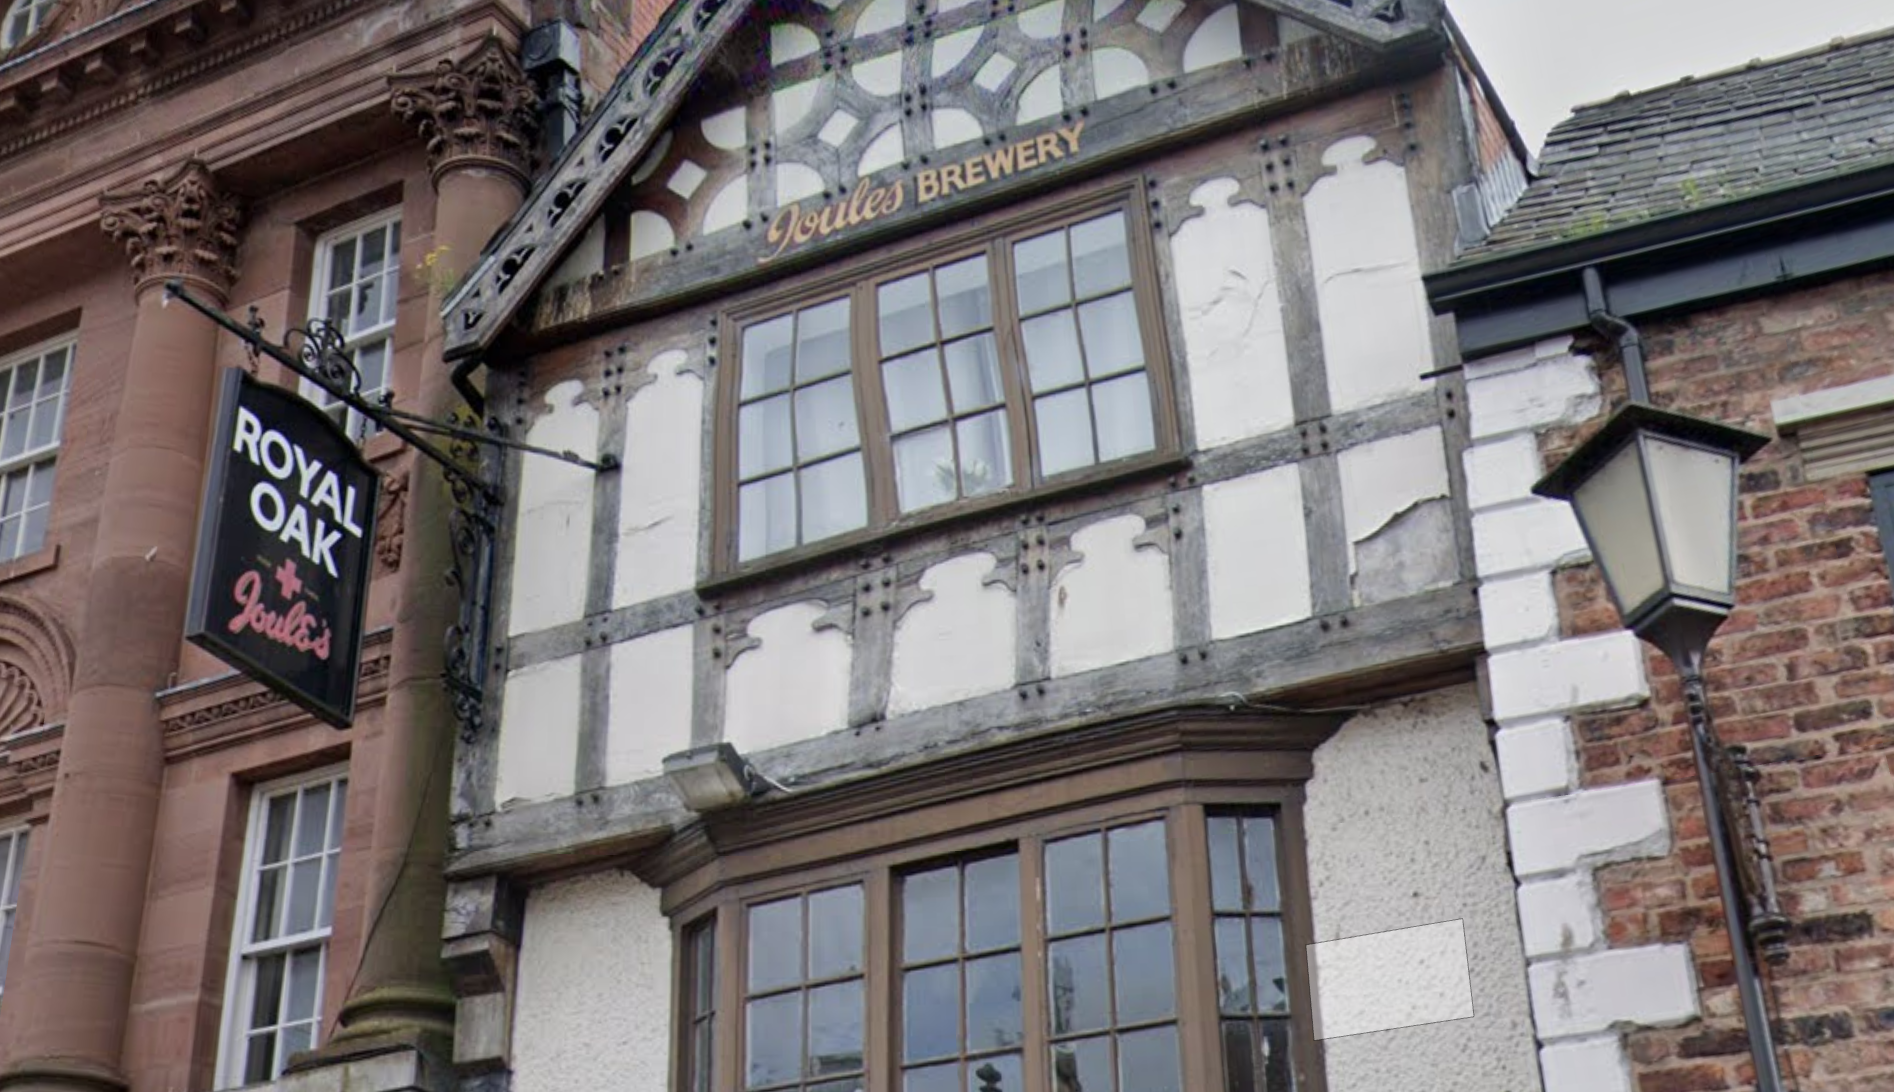 Plans to create Airbnb flats in Grade II listed building in Wrexham submitted to Council